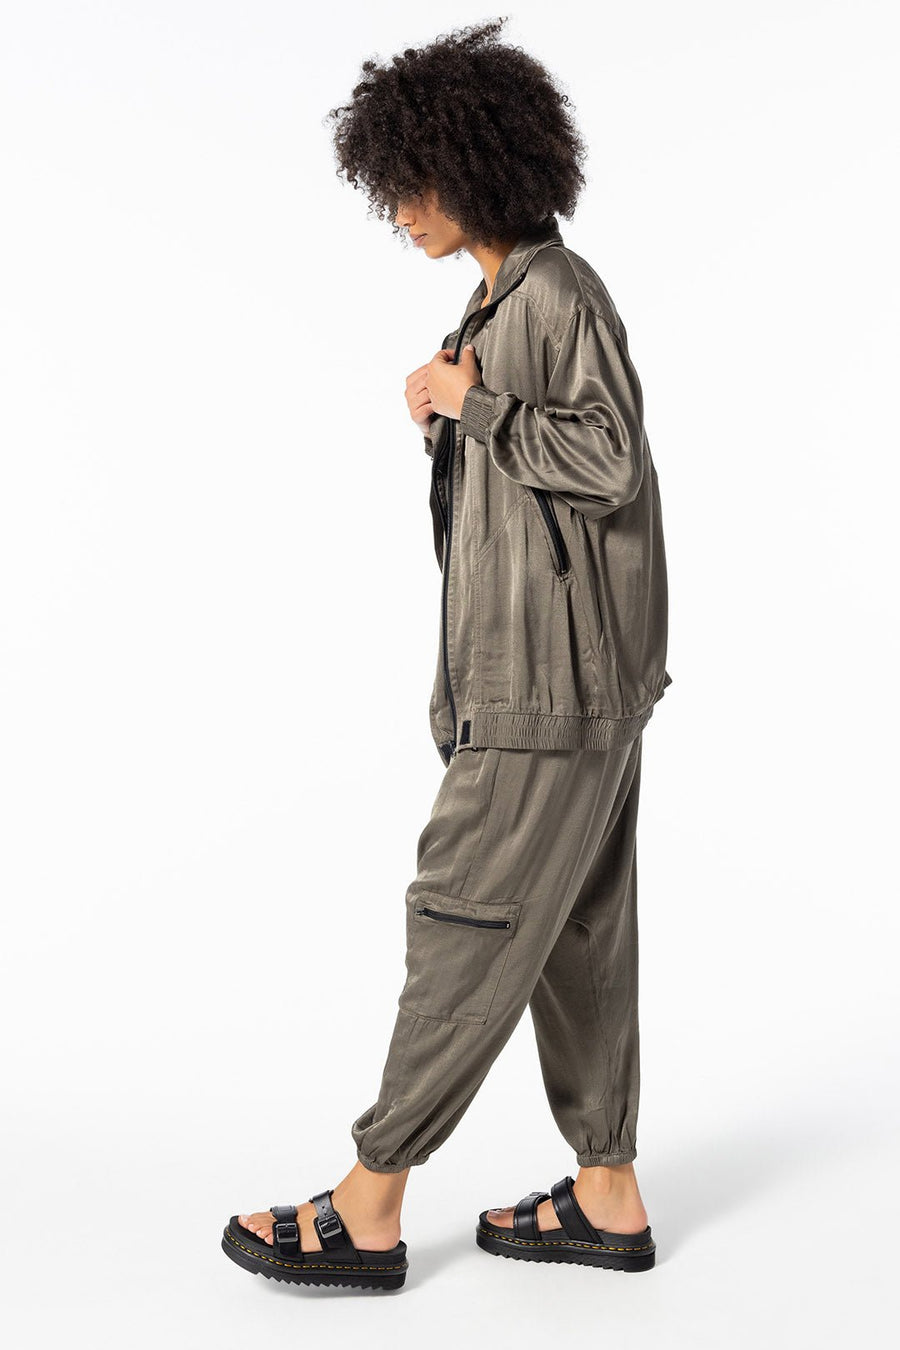 HANOVER DROP CROTCH PANT, ARMY - Burning Torch Online Boutique